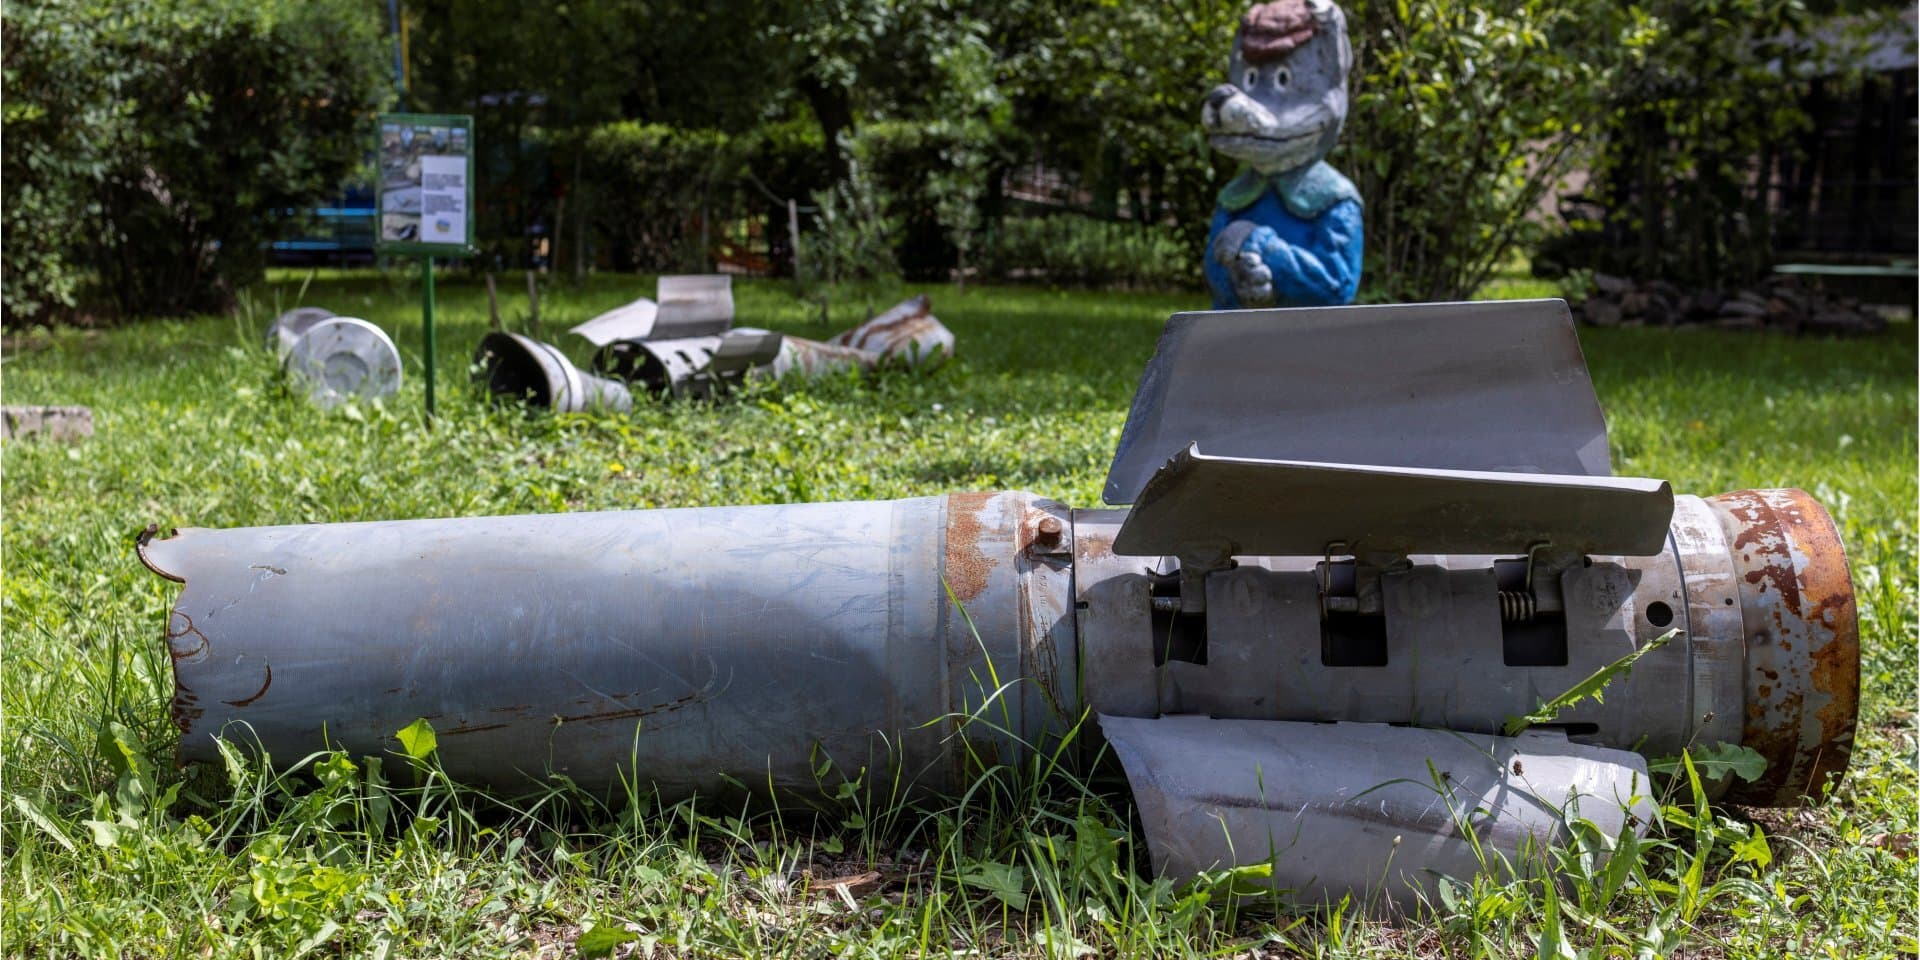 Remains of a missile at a garden of the Zoo in Mykolaiv